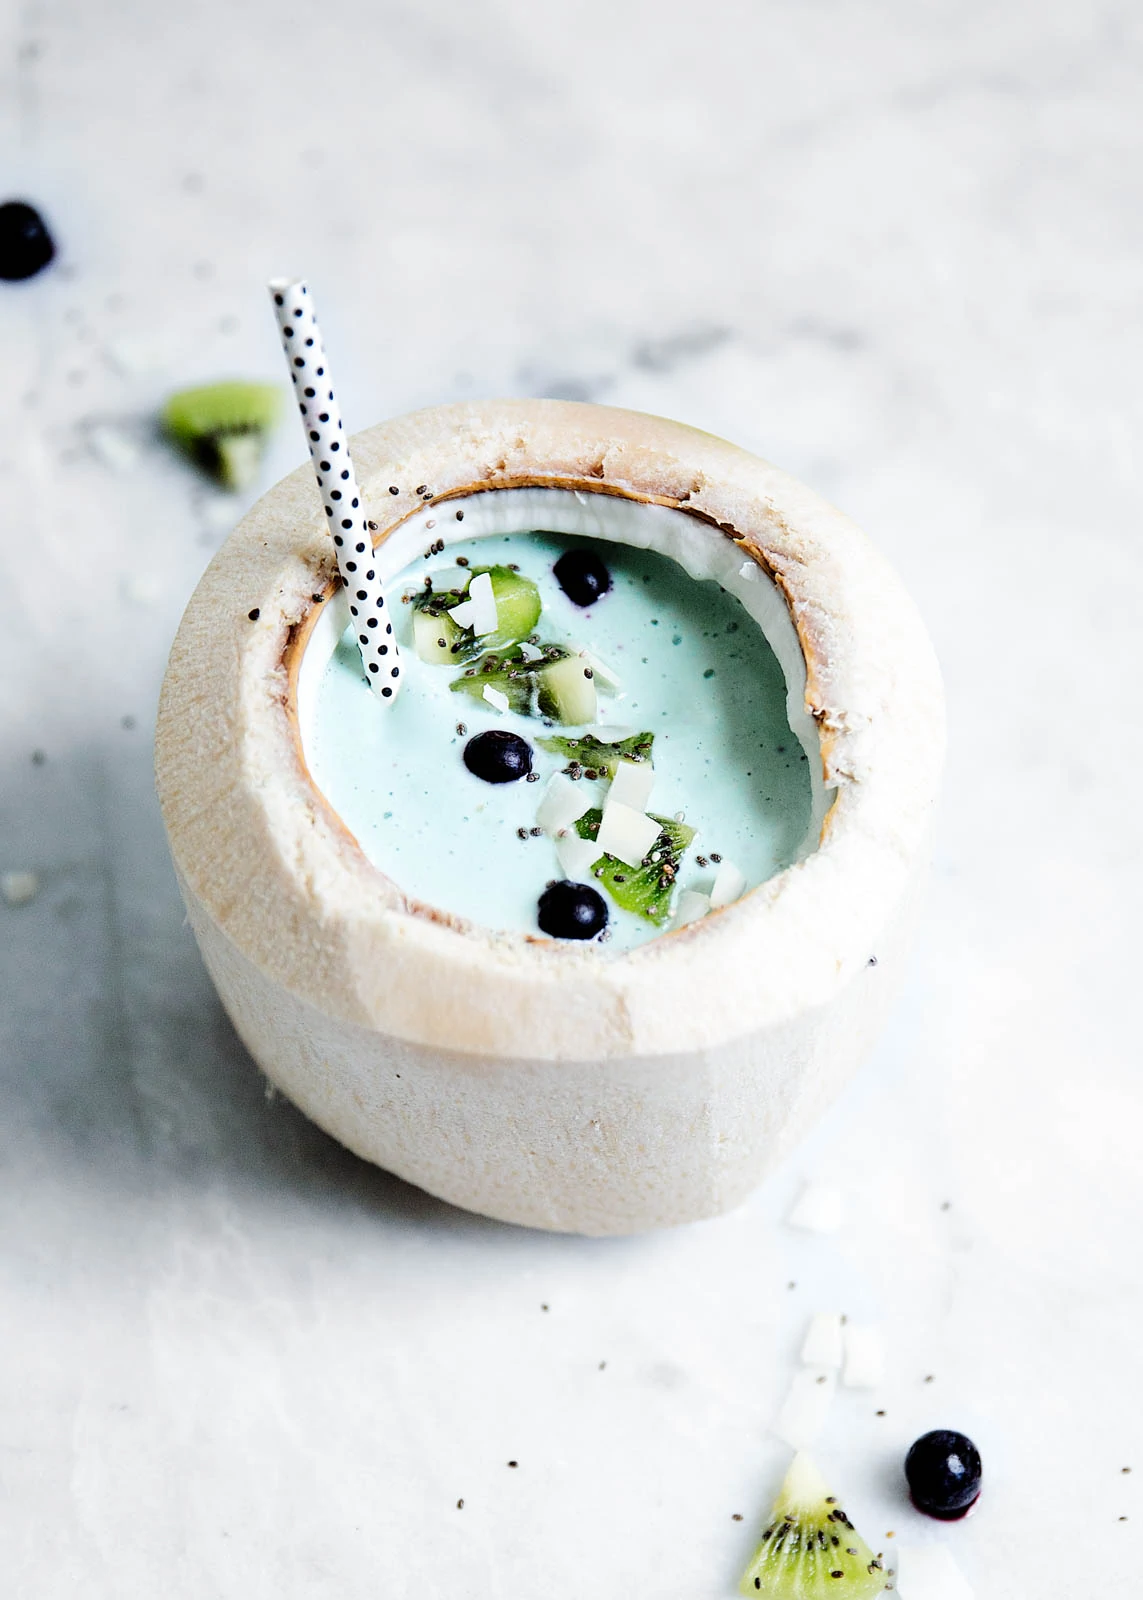 A blue algae smoothie filled with detoxifying spirulina, chia seeds, and blueberries. Hello, summer bod.